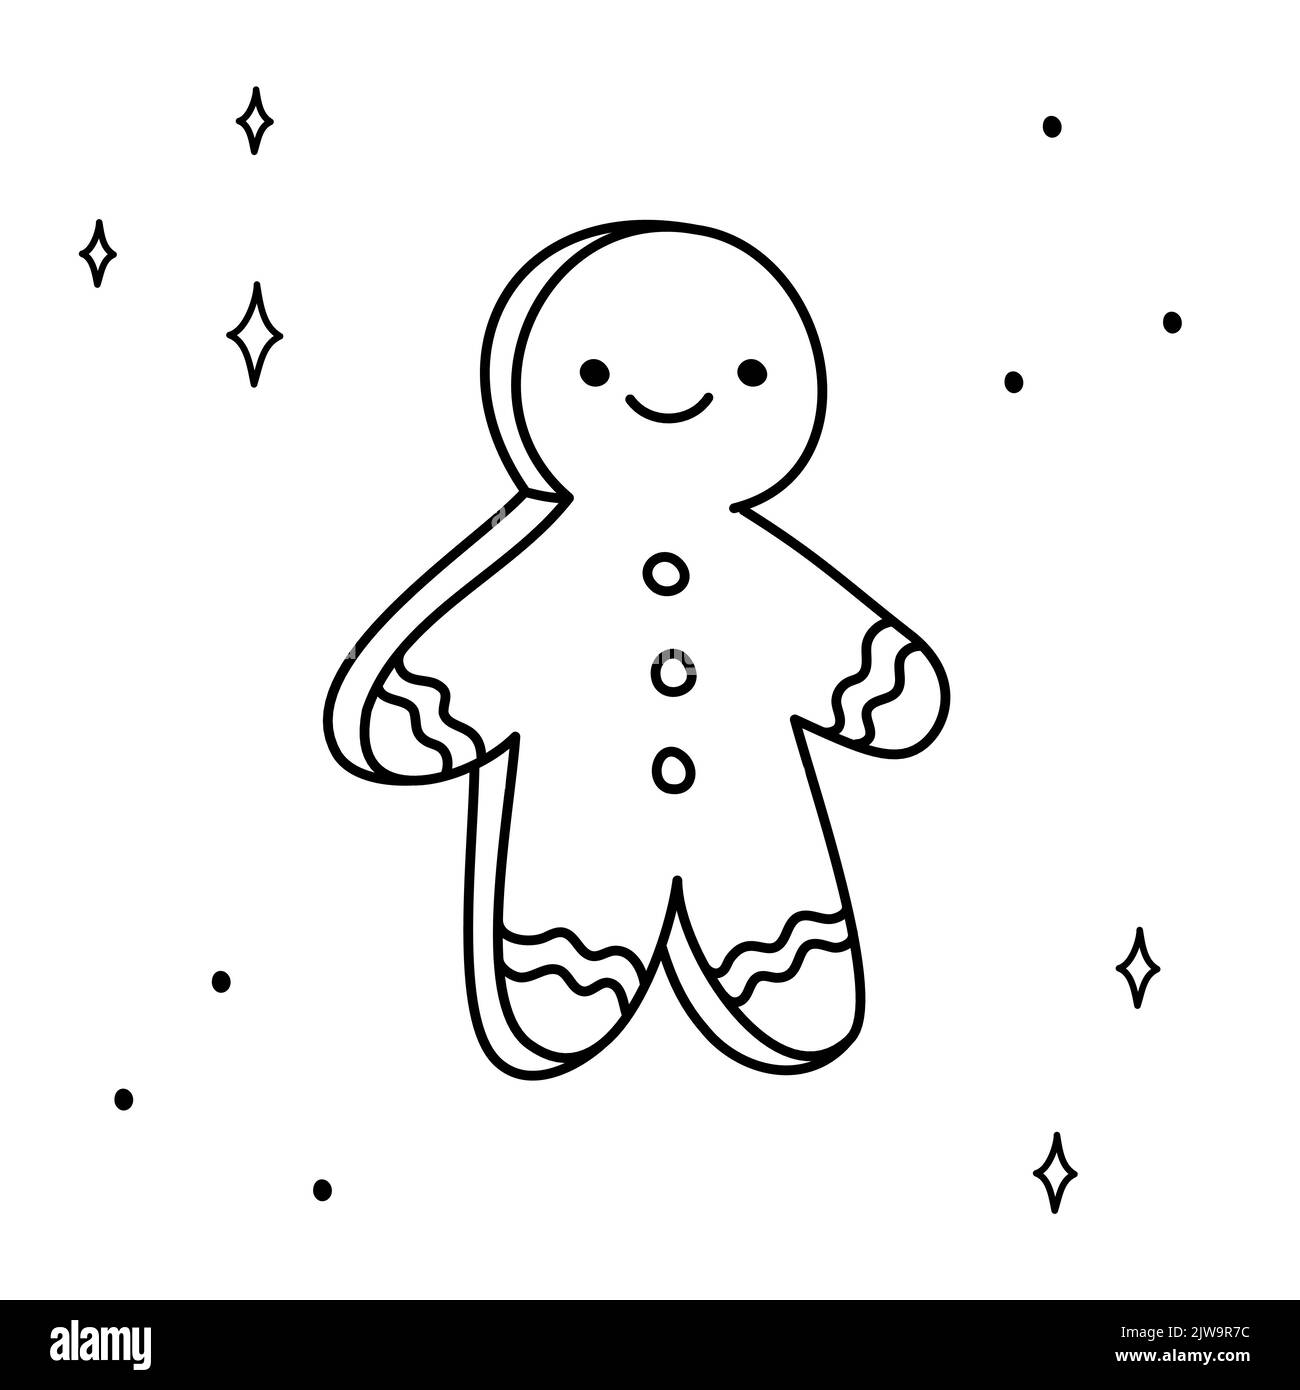 Hand drawn christmas Gingerbread Man isolated on white background. New Year vector food sketch, doodle icon or holiday illustration Stock Vector